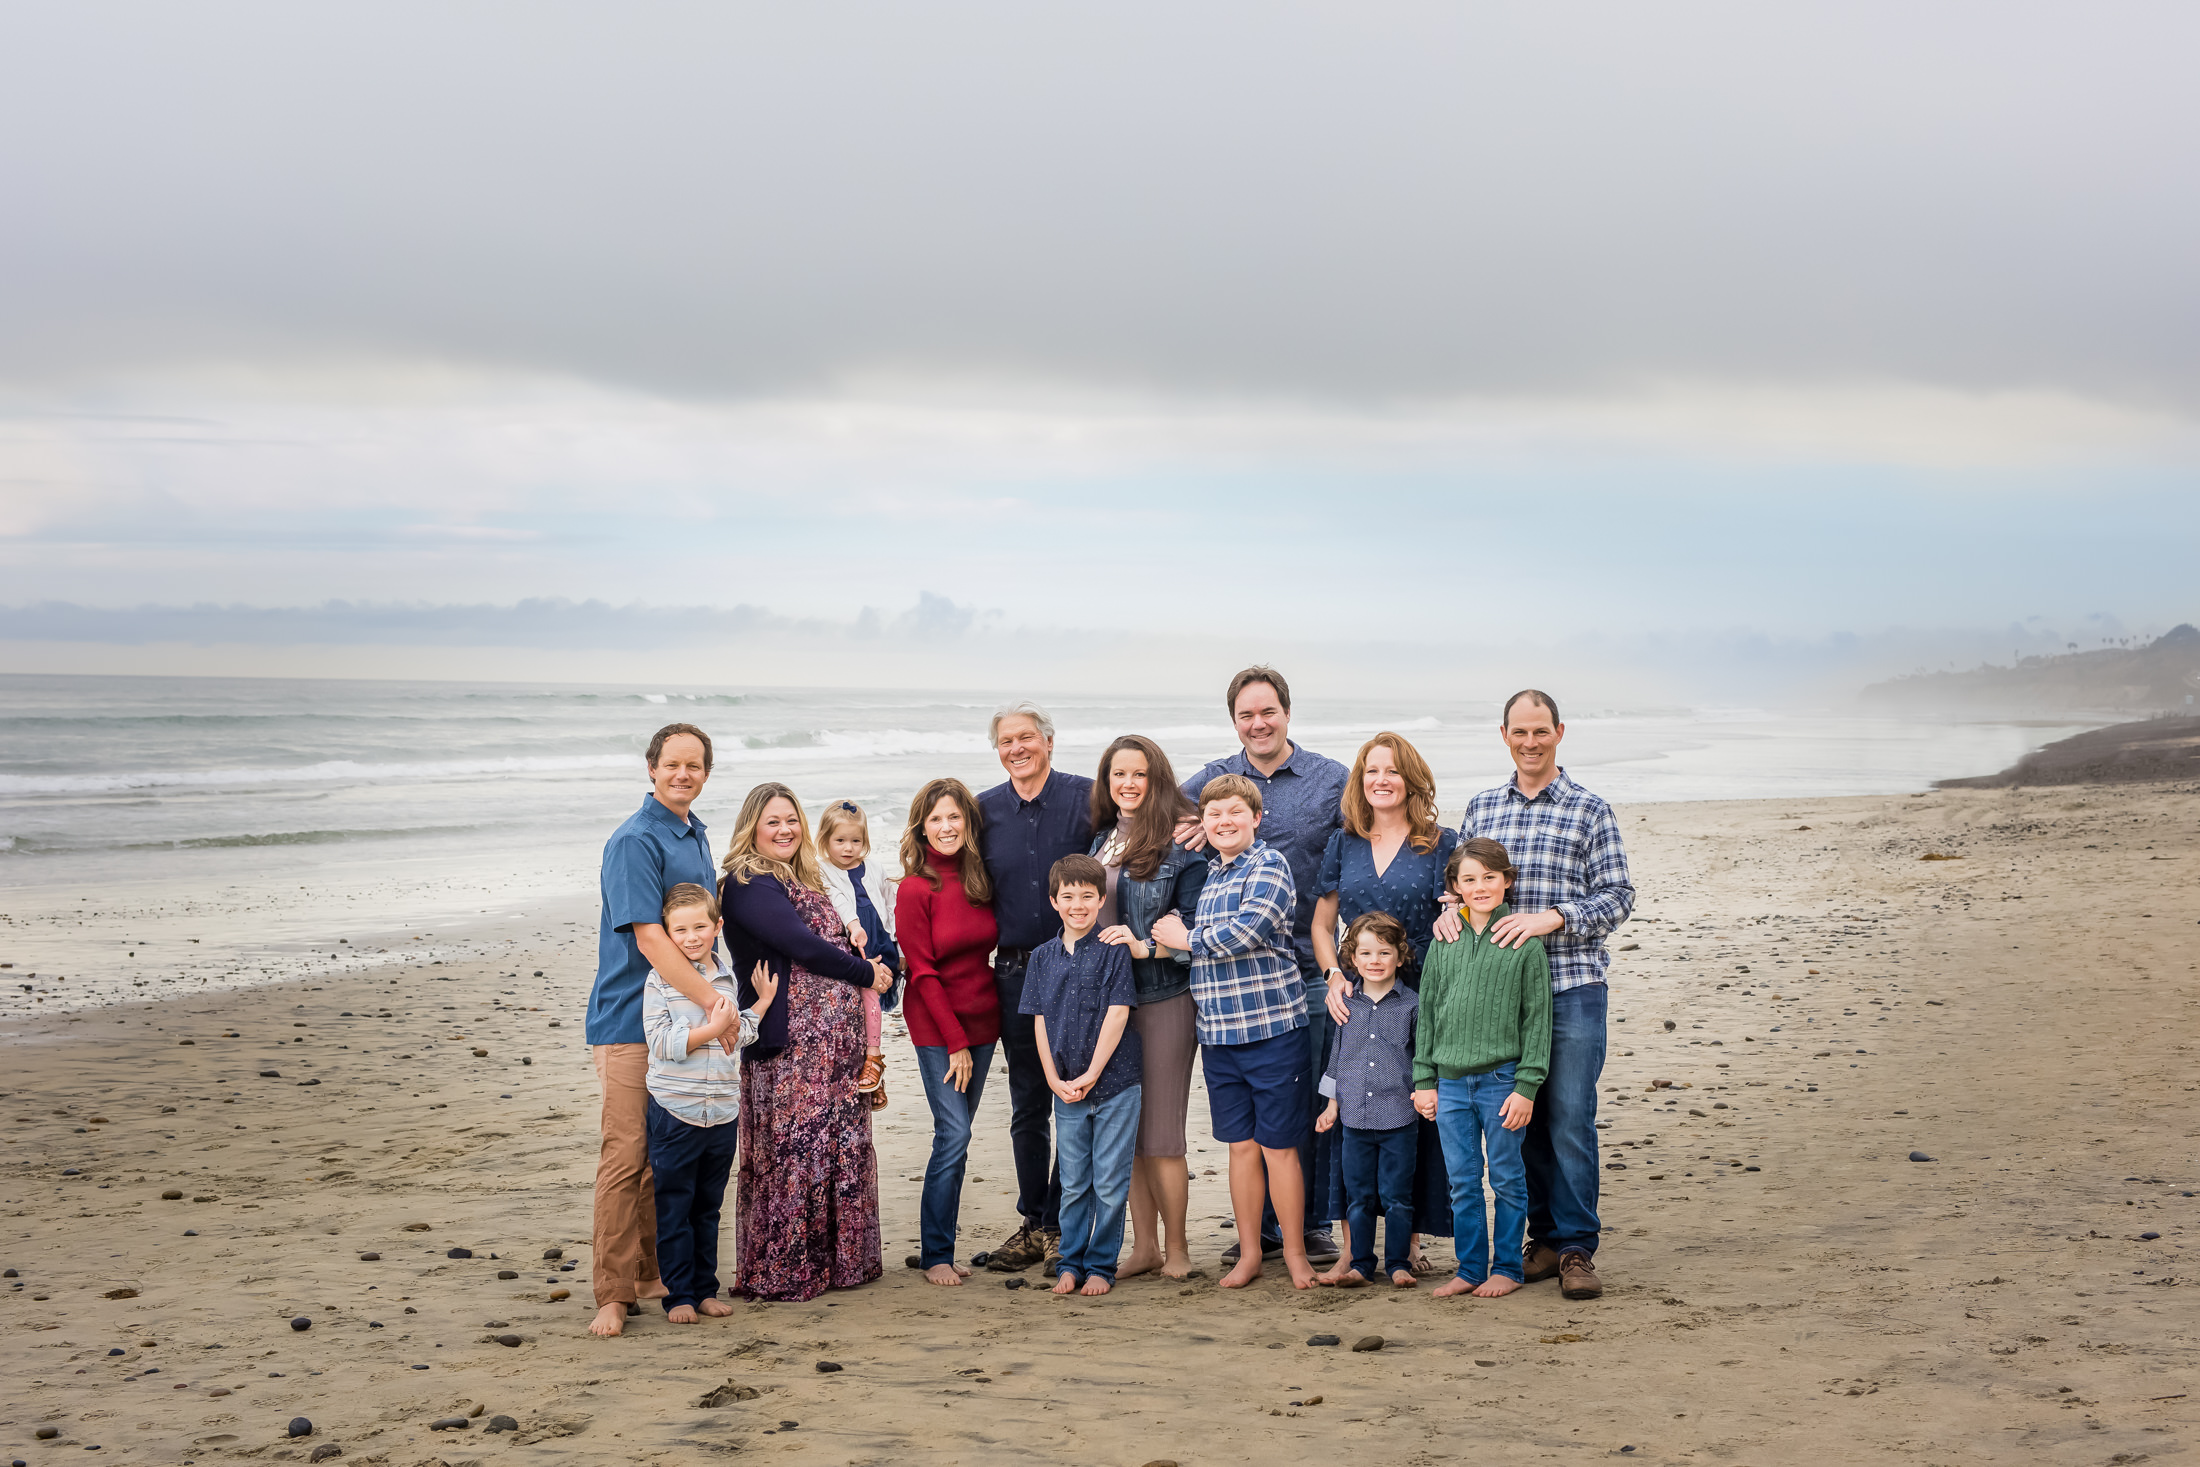 portrait of a family of 14 barefoot on the sand at low tide at the beach at sunset. colors are blue, green and red.